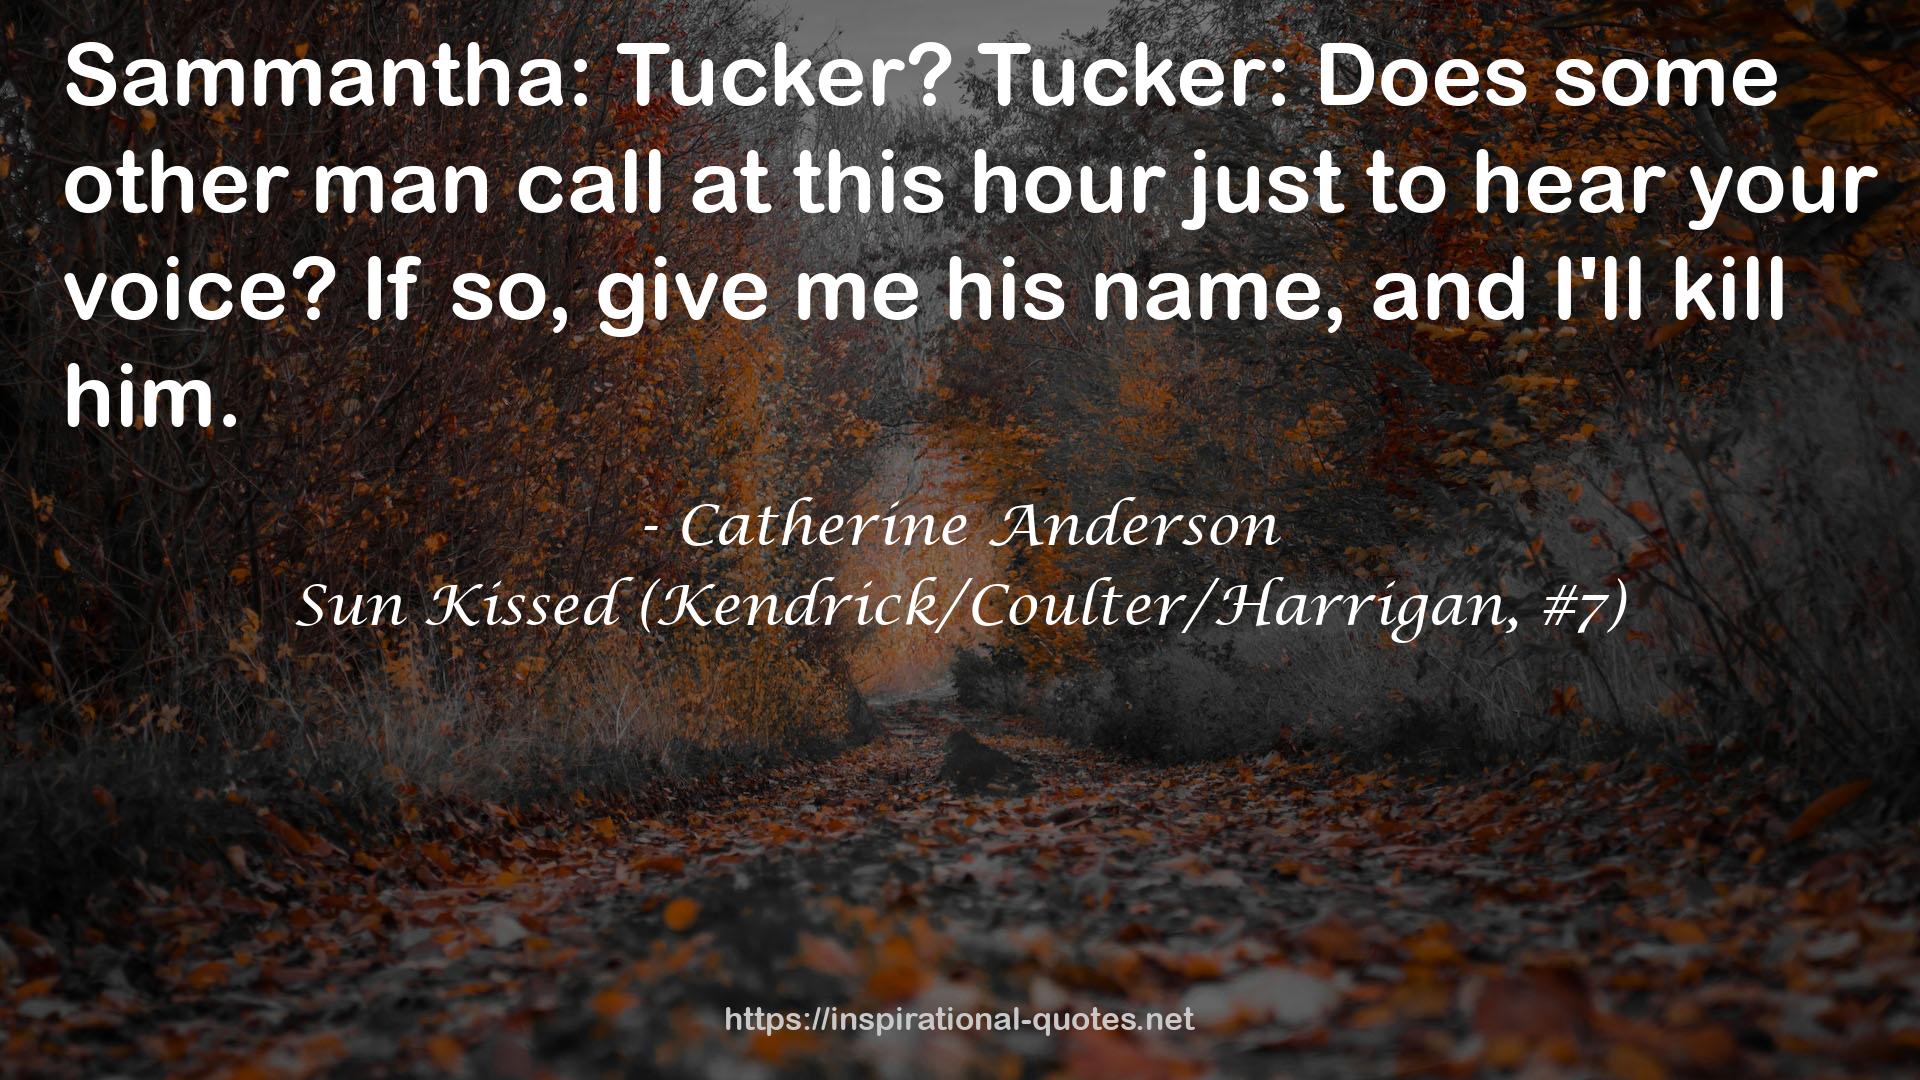 Sun Kissed (Kendrick/Coulter/Harrigan, #7) QUOTES